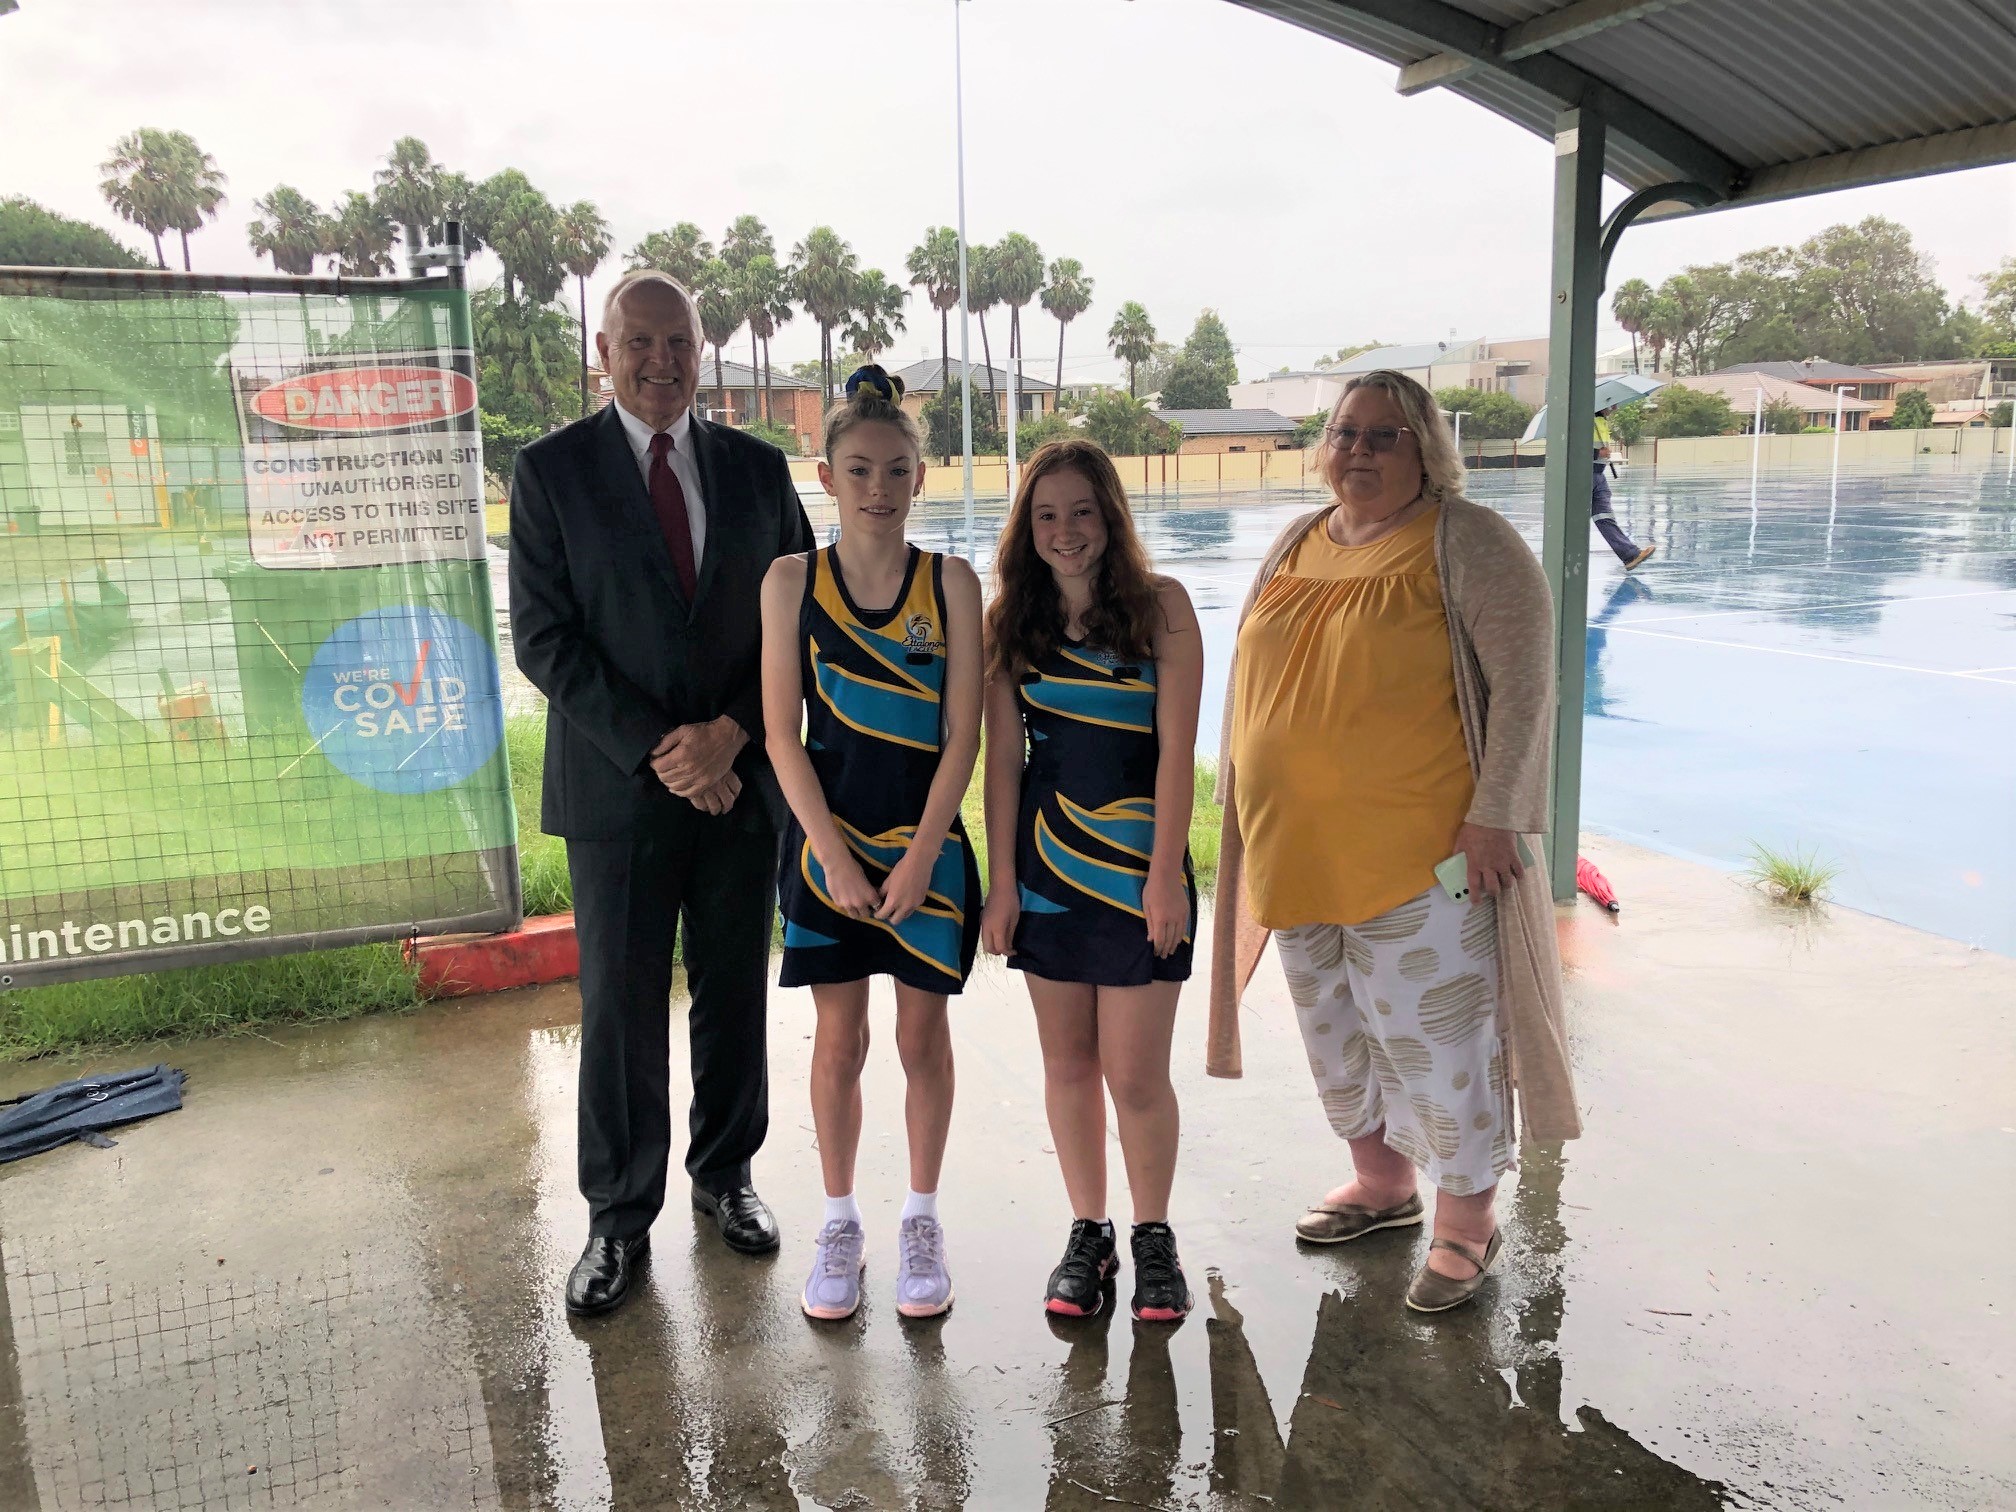 Council Administrator Rik Hart is joined by local Ettalong Eagles Netball Club players (Taylah Sankey and Sophie Planicka), and Woy Woy Peninsula Netball Association President, Sharon Bailey at Lemon Grove Netball Courts, Ettalong. Works are underway in 